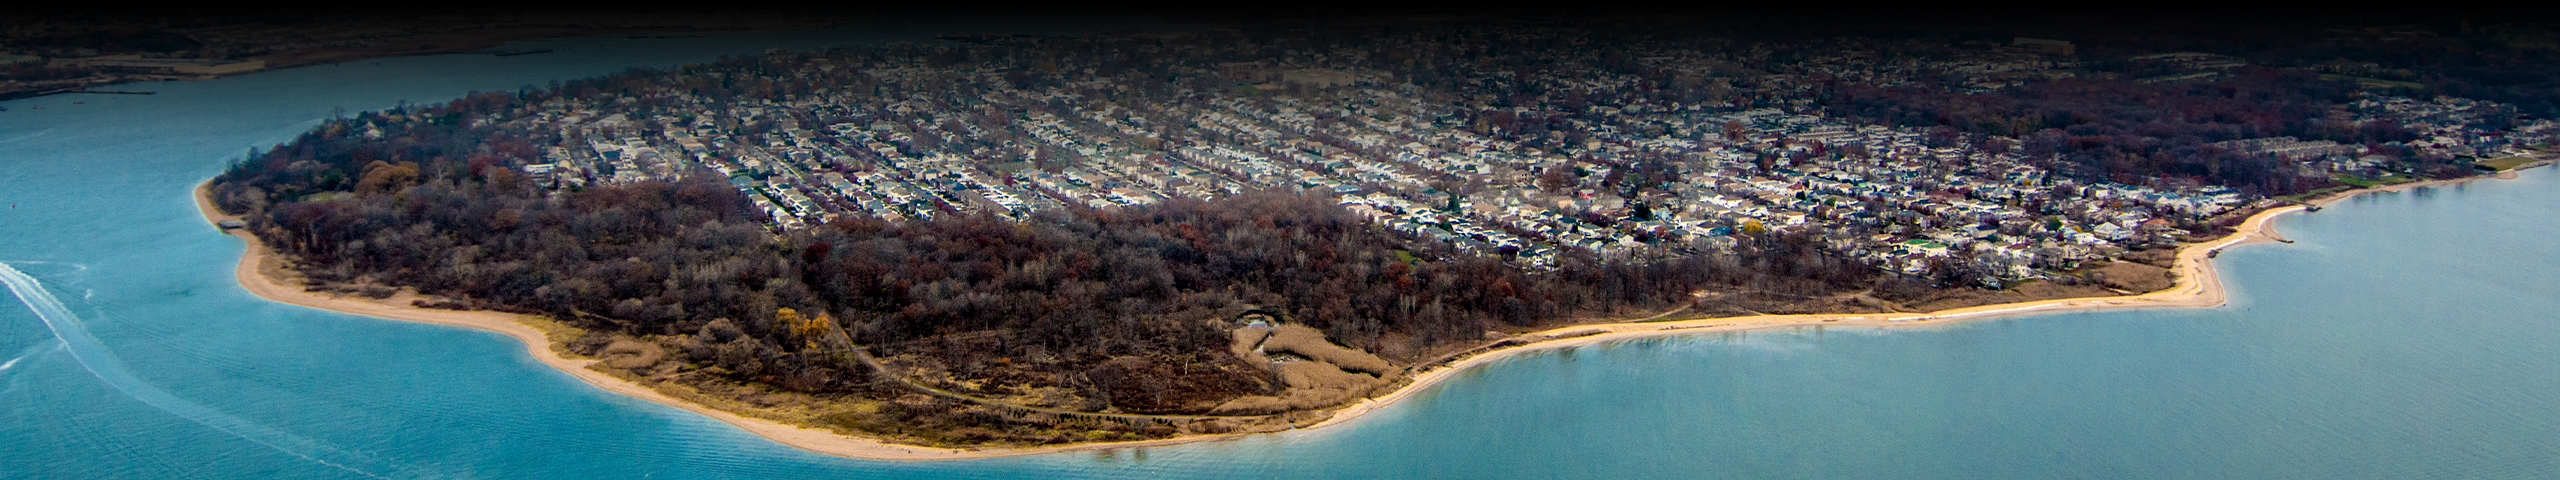 Staten Island South Shore Aerial View